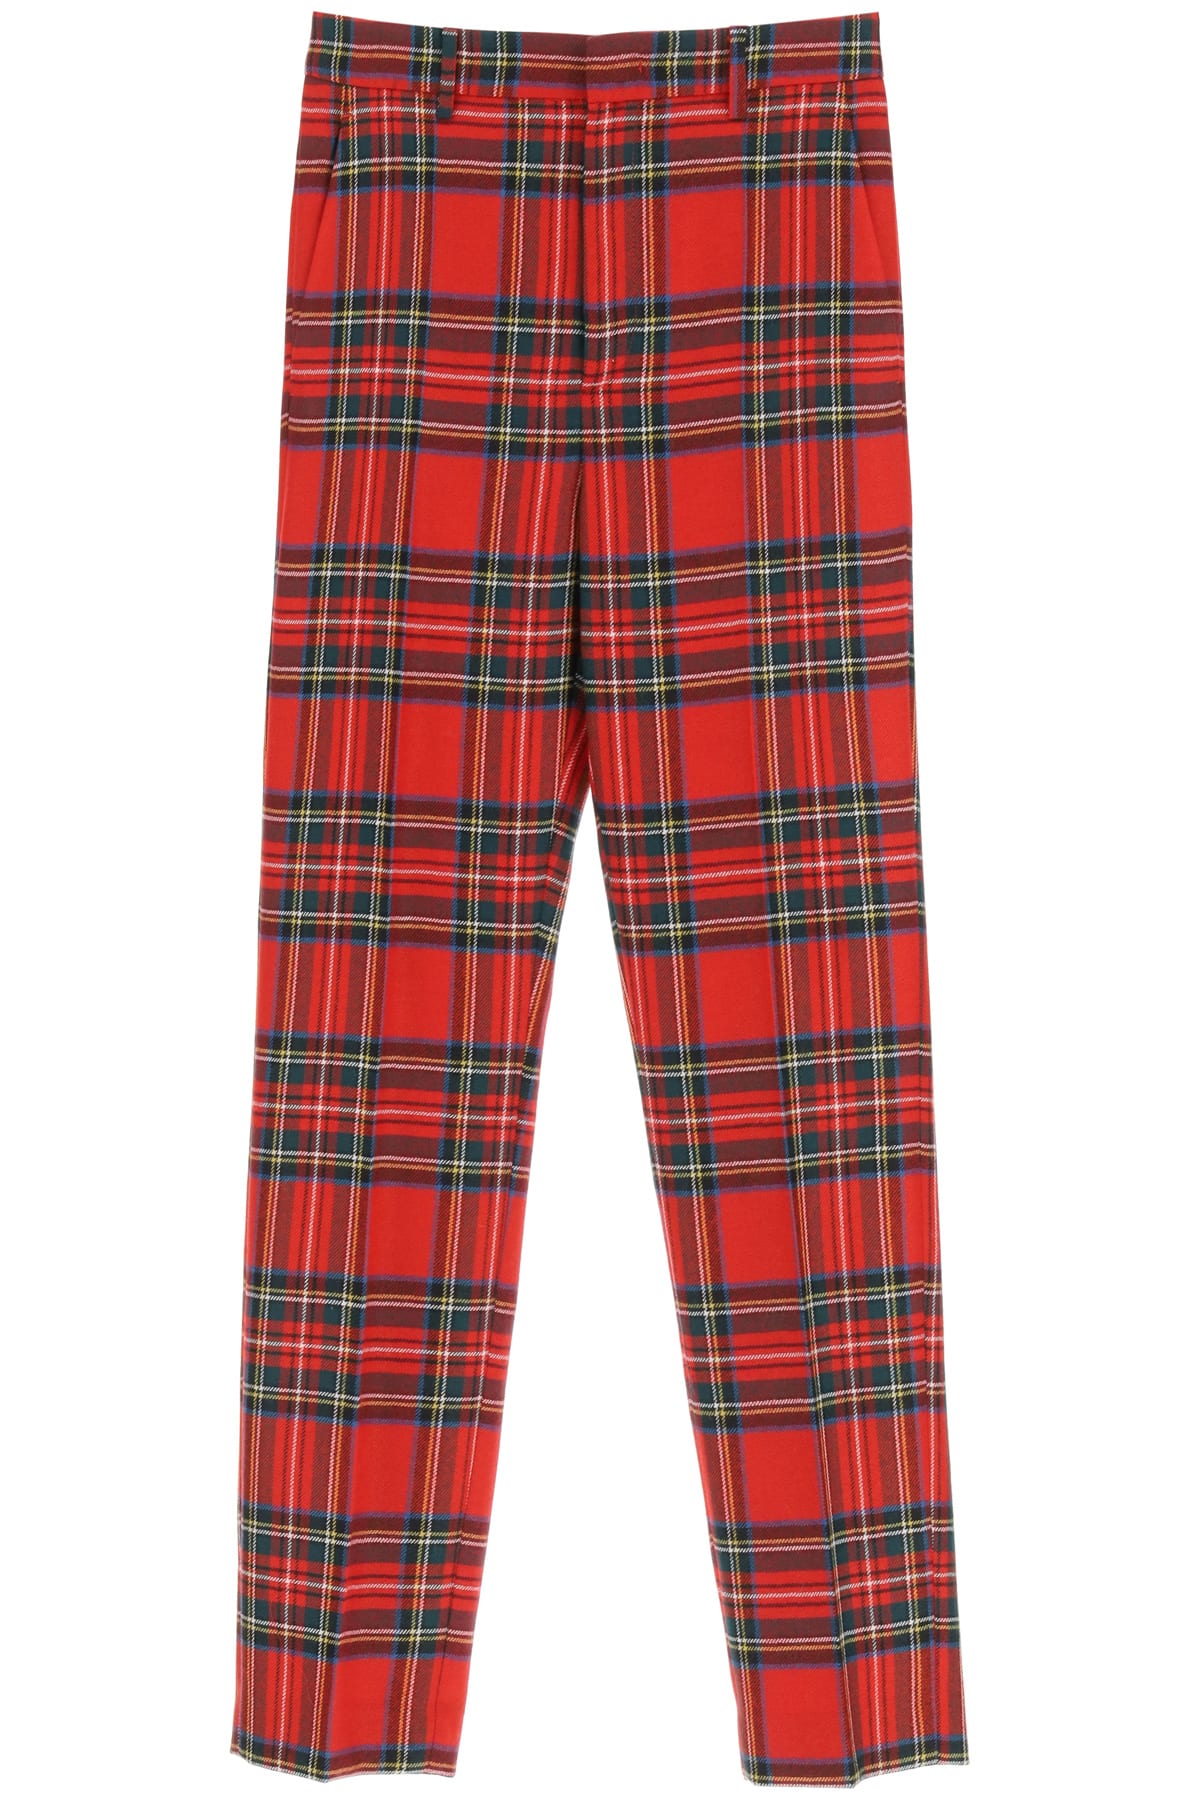 RED Valentino Plaid Wool Trousers